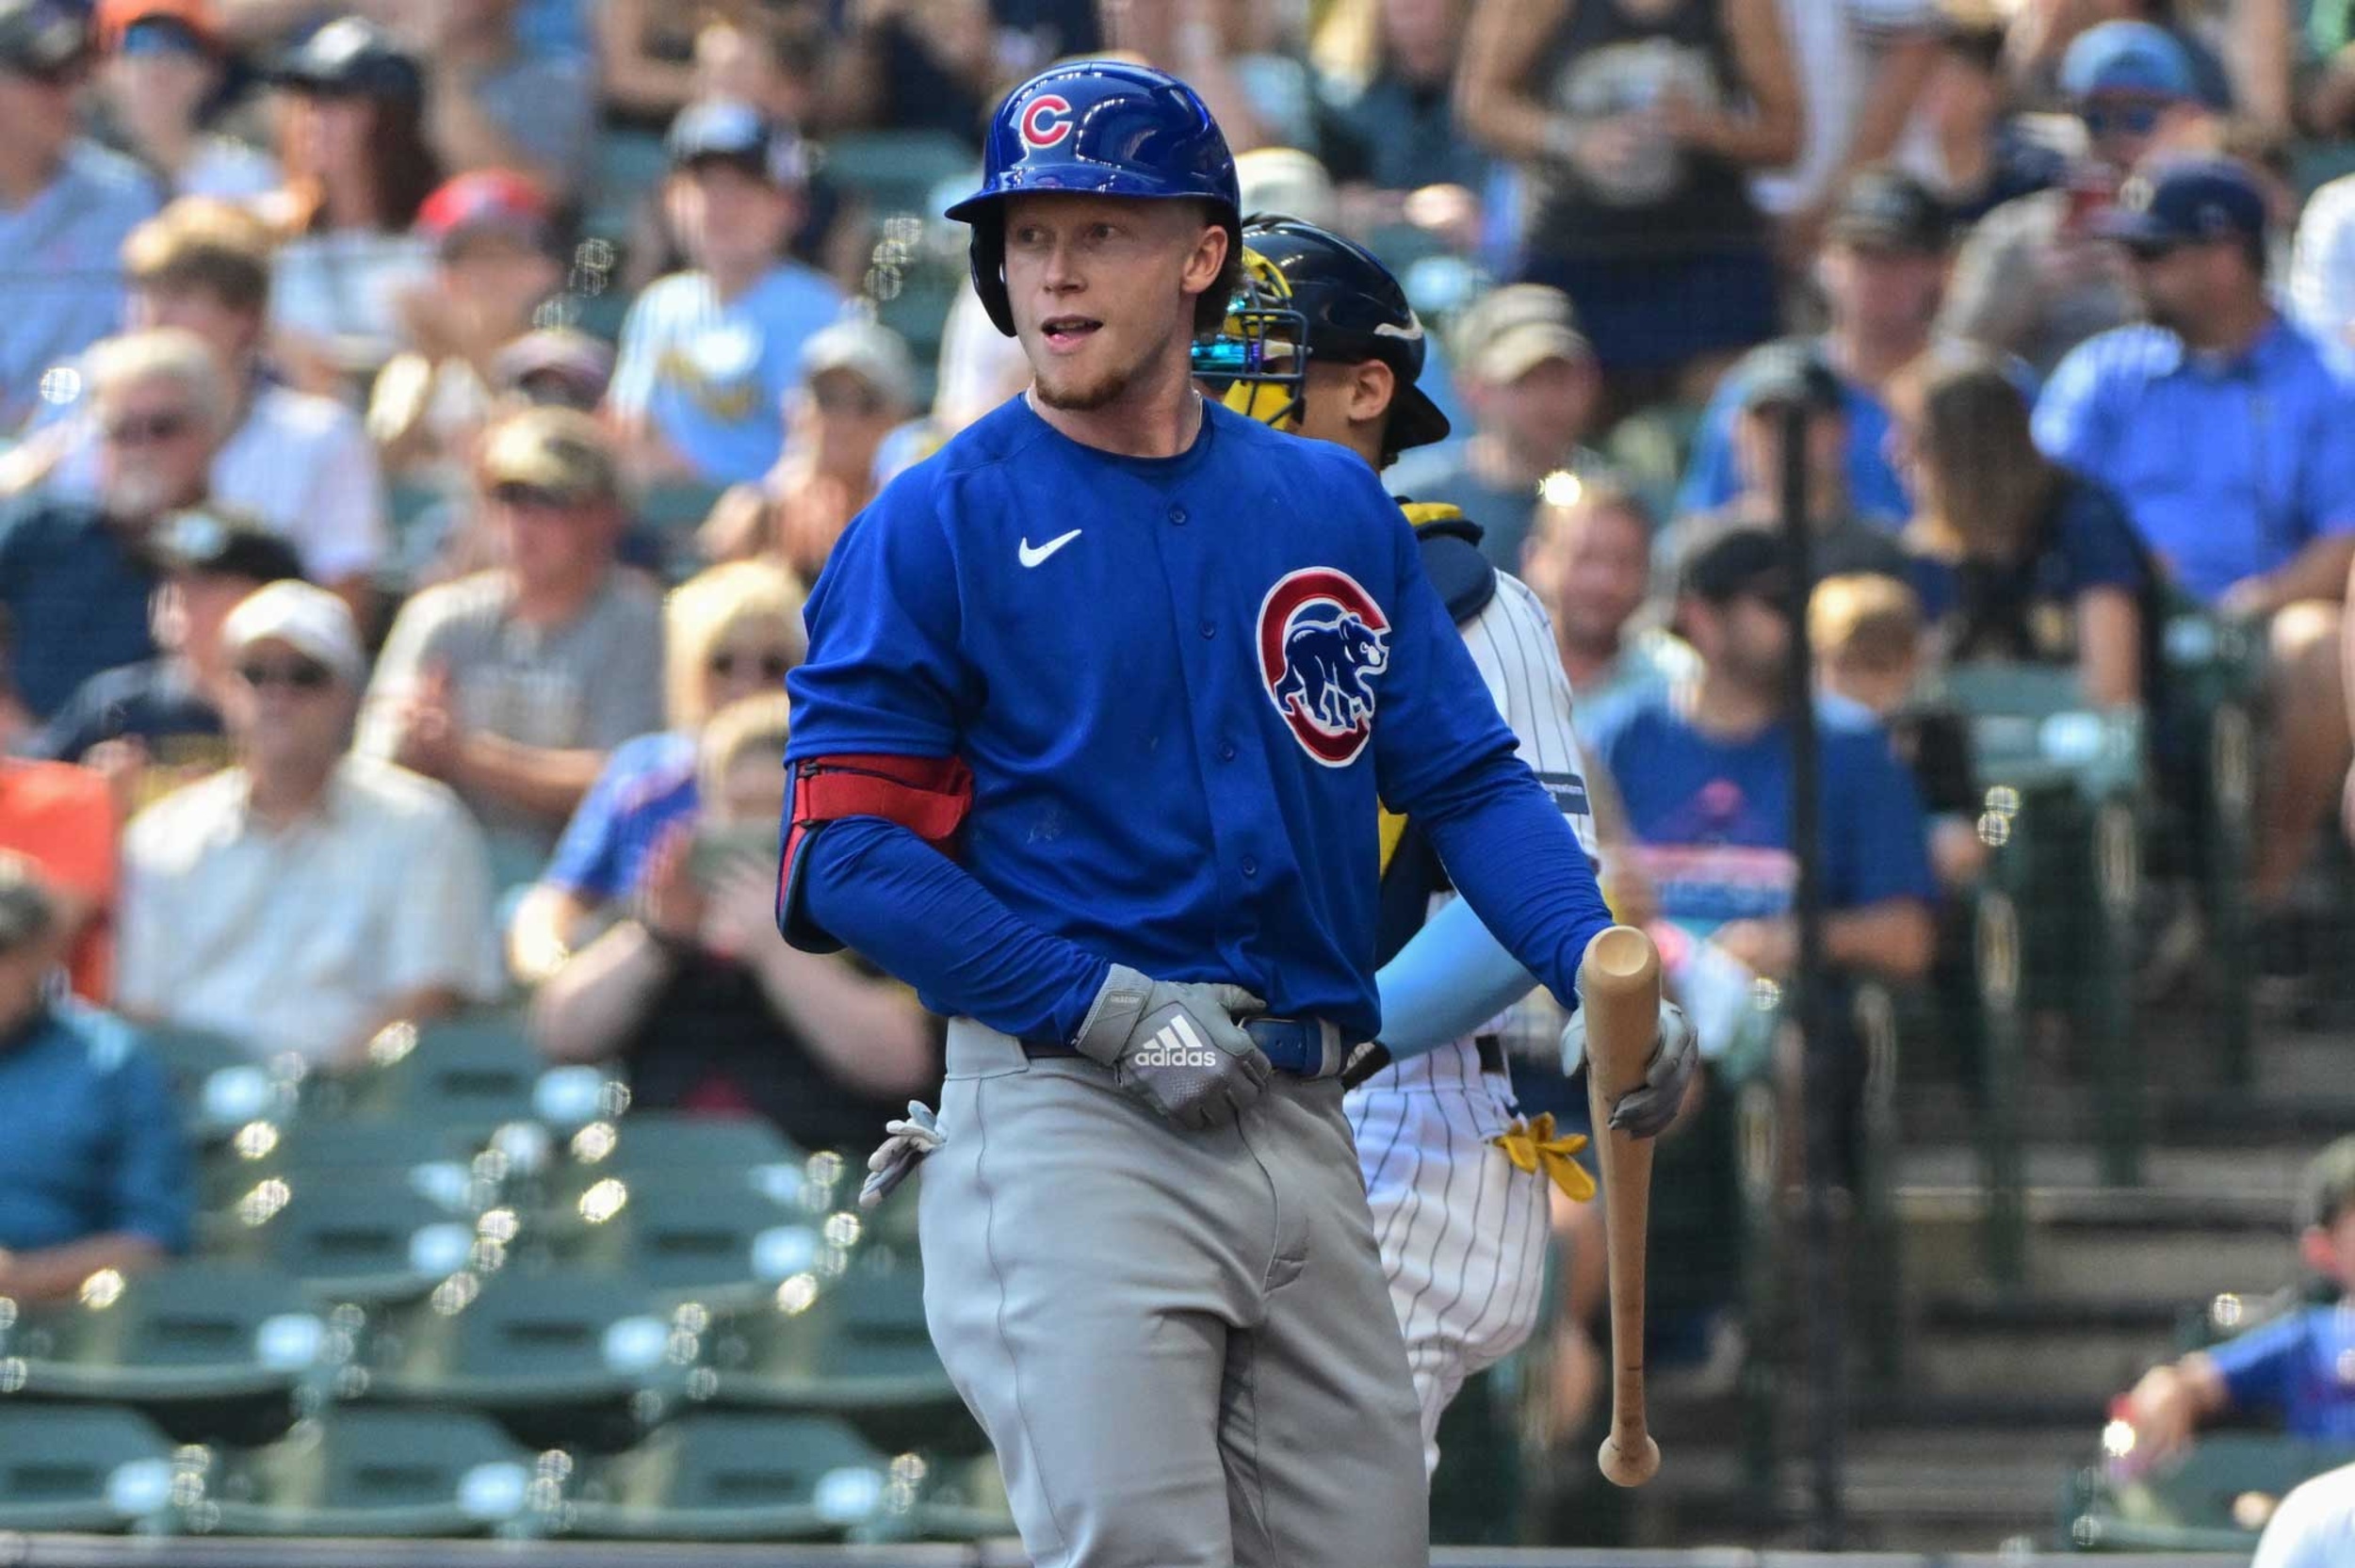 <p>The Cubs got a huge contribution from center fielder Cody Bellinger last season and could rely on Crow-Amstrong to fill his shoes in 2024. The top prospect hit .283-20-82 with 37 steals between Double- and Triple-A last season, flashing elite upside.</p><p>You may also like: <a href='https://www.yardbarker.com/mlb/articles/the_24_best_players_in_milwaukee_brewers_history_022924/s1__38897628'>The 24 best players in Milwaukee Brewers history</a></p>